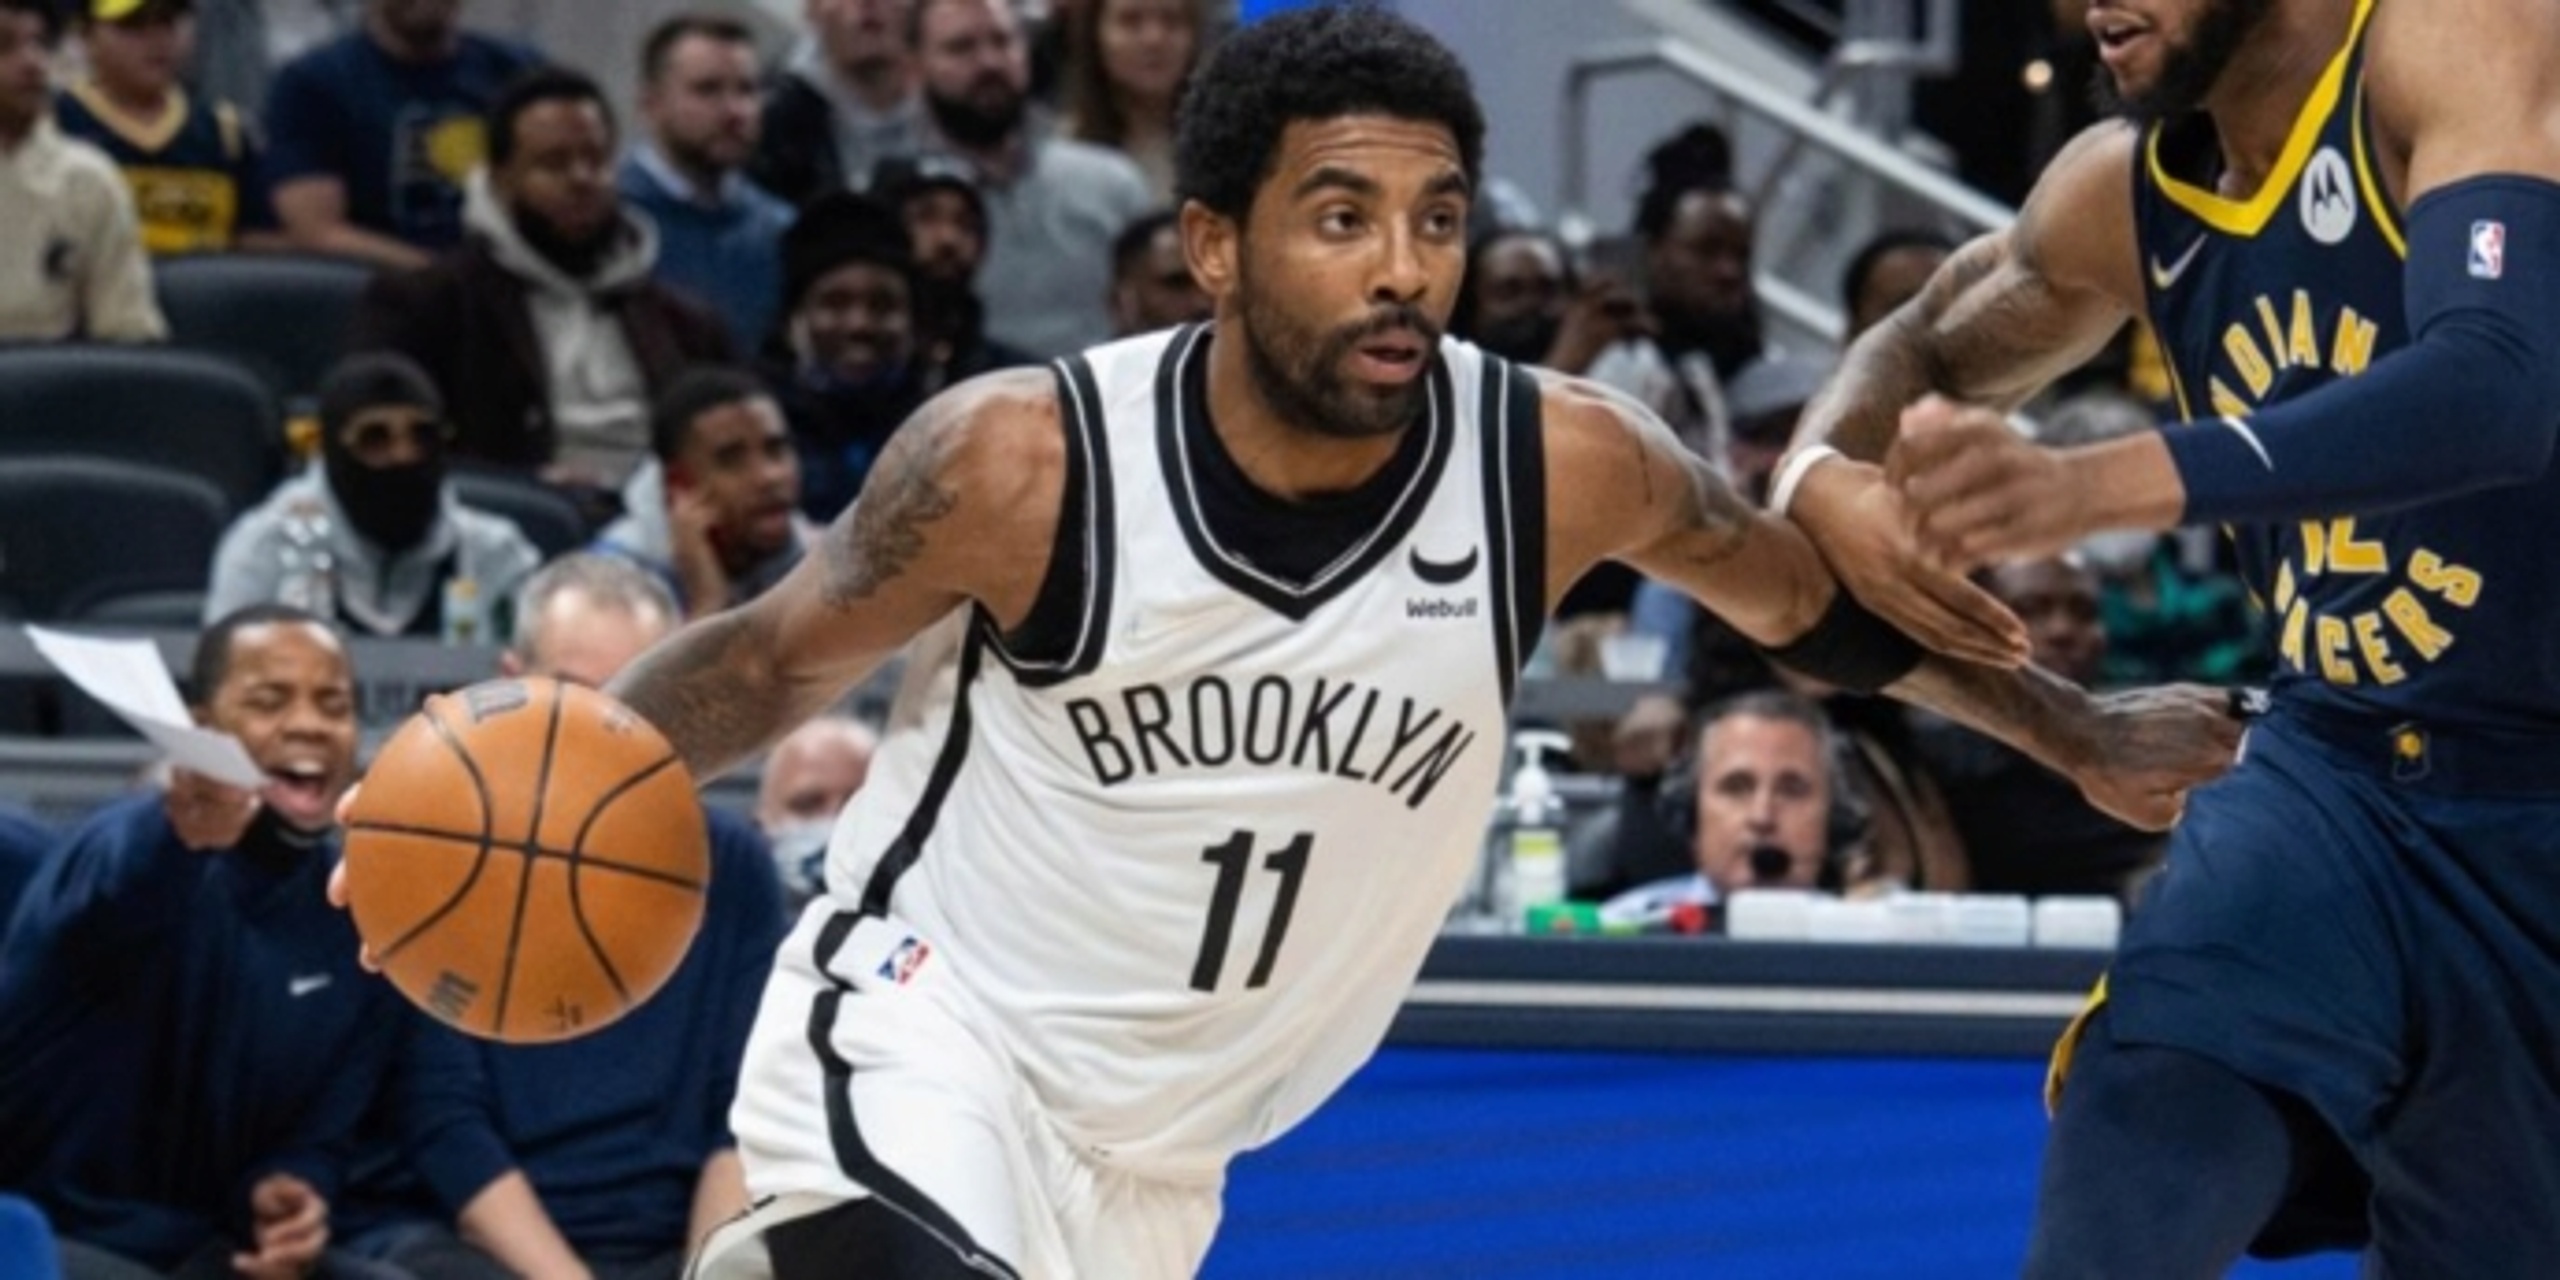 Maybe part-time Kyrie Irving could get the Nets where they want to go